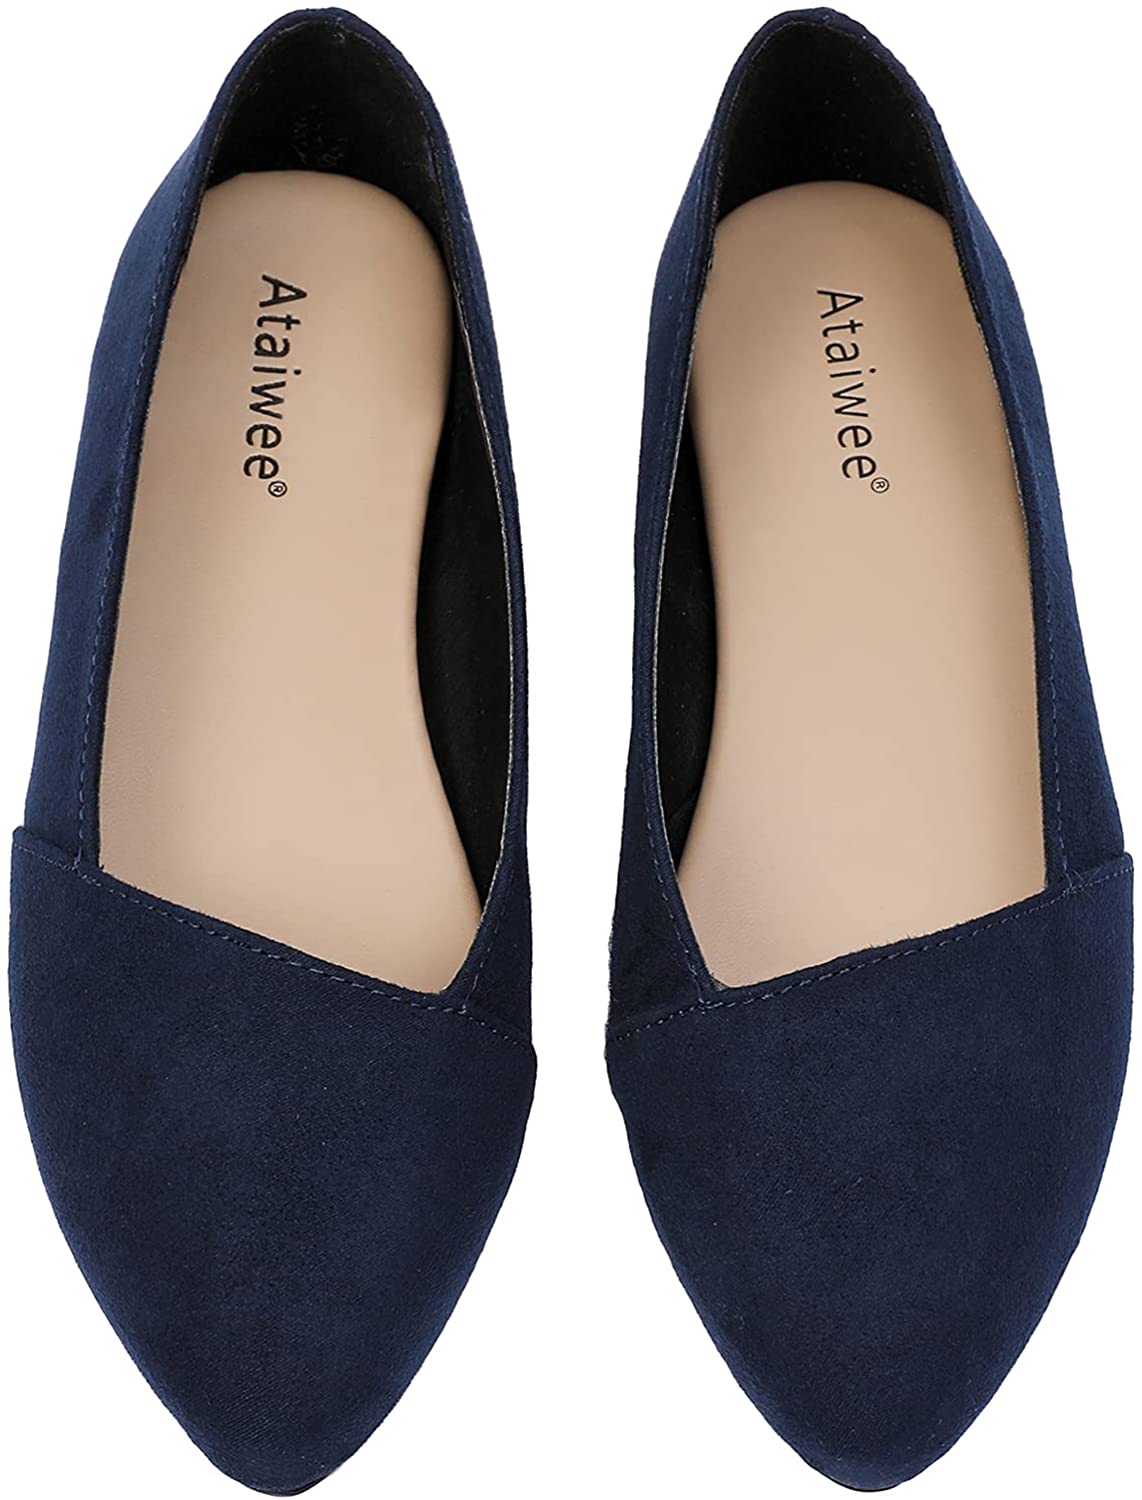 Soft Pointed Toe Suede Classic Flat Shoes. Ataiwee Women's Ballet Flats 